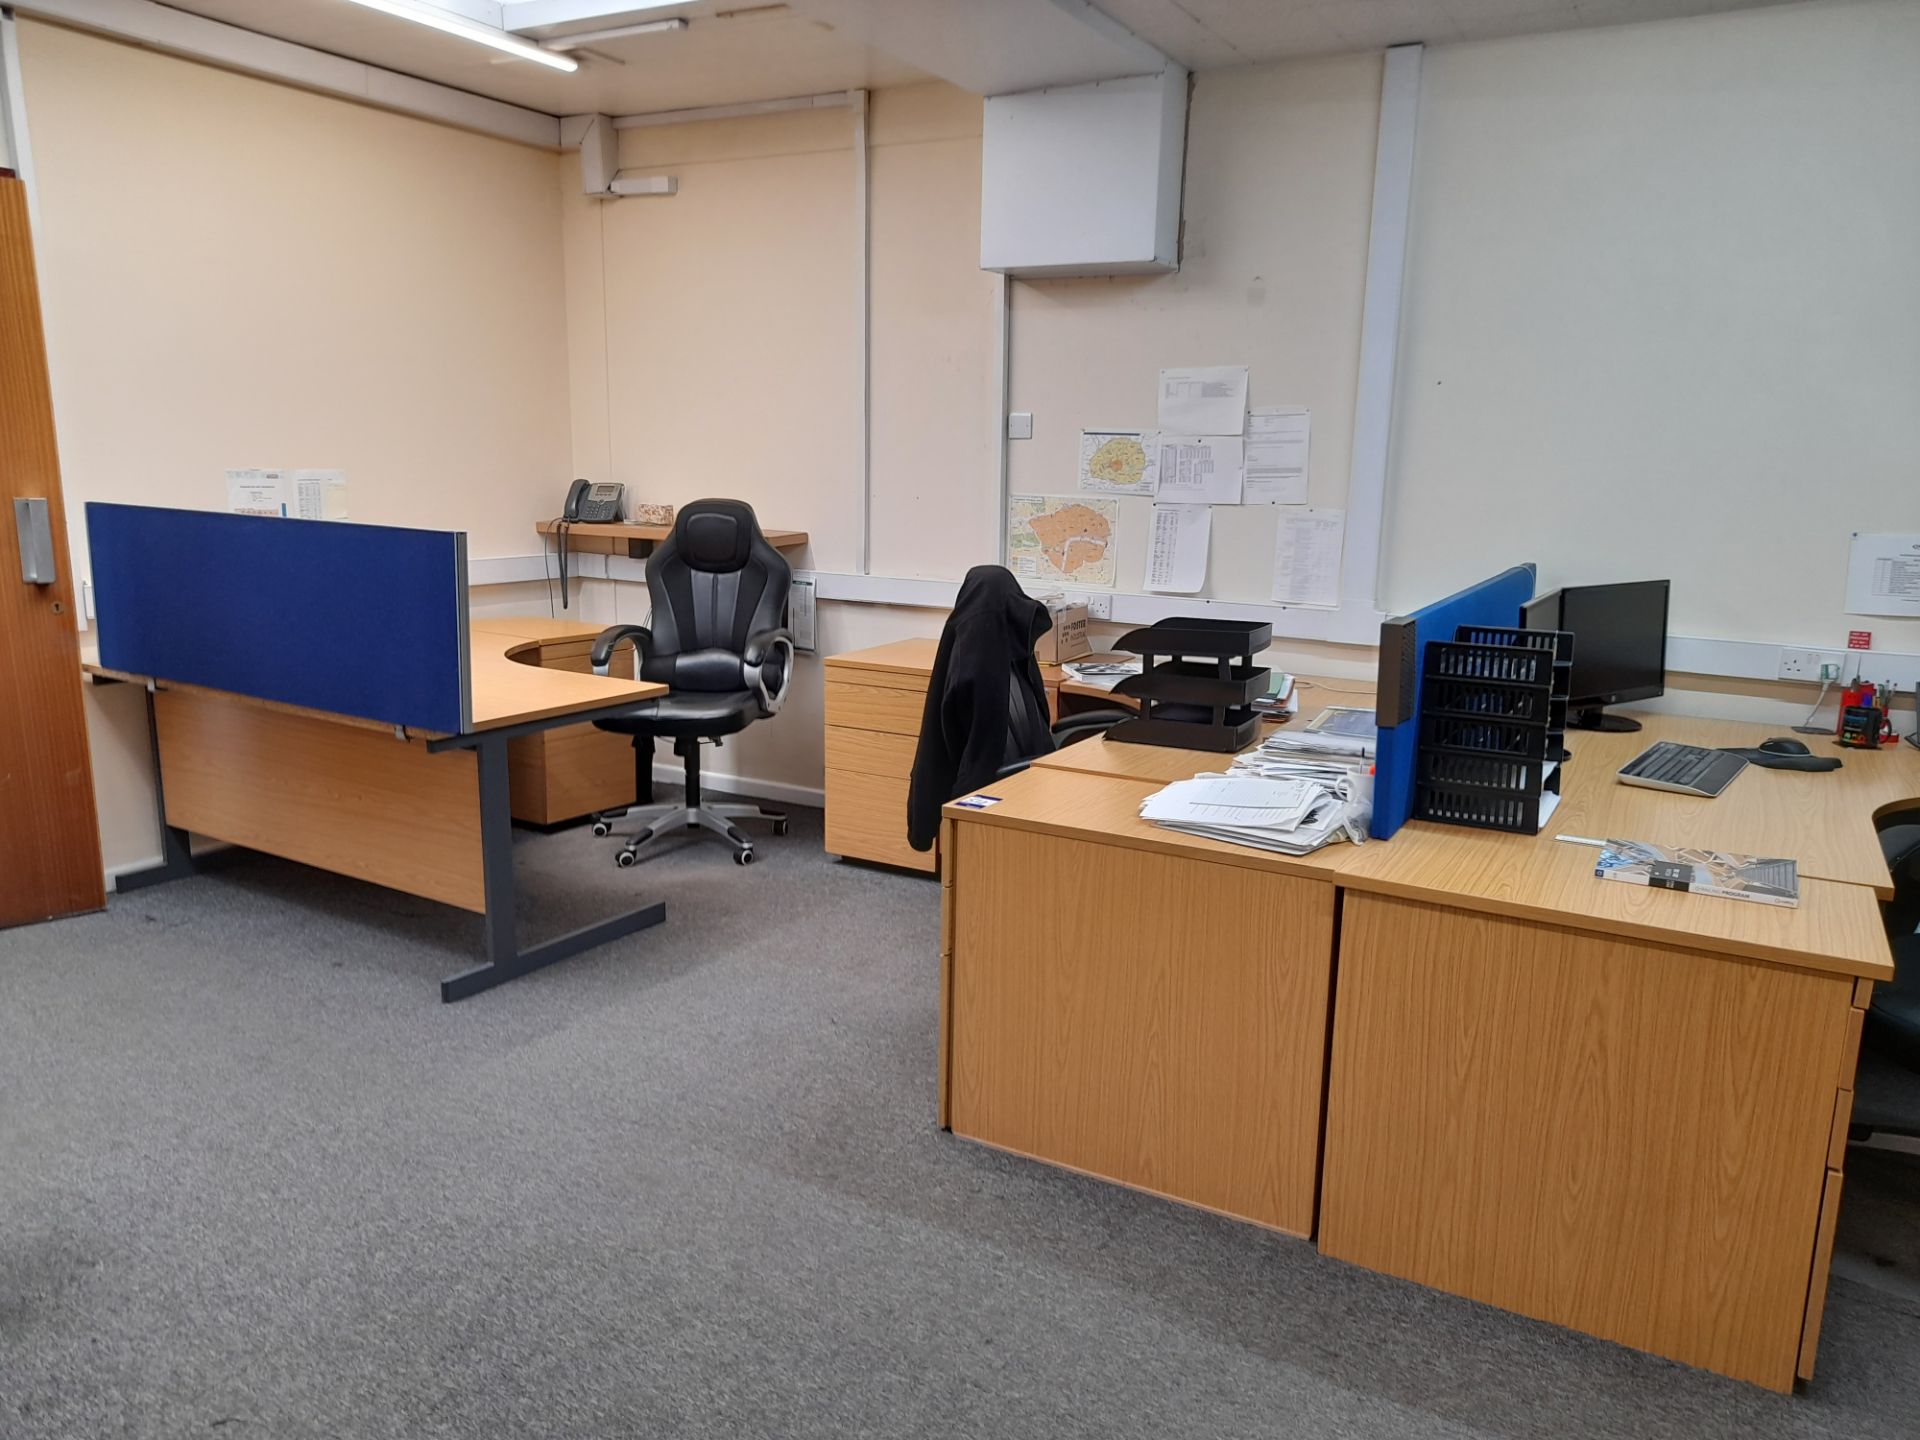 Contents to office to include 6 x desks, 6 x chairs, 12 x pedestal drawer units, 4 x 2 drawer filing